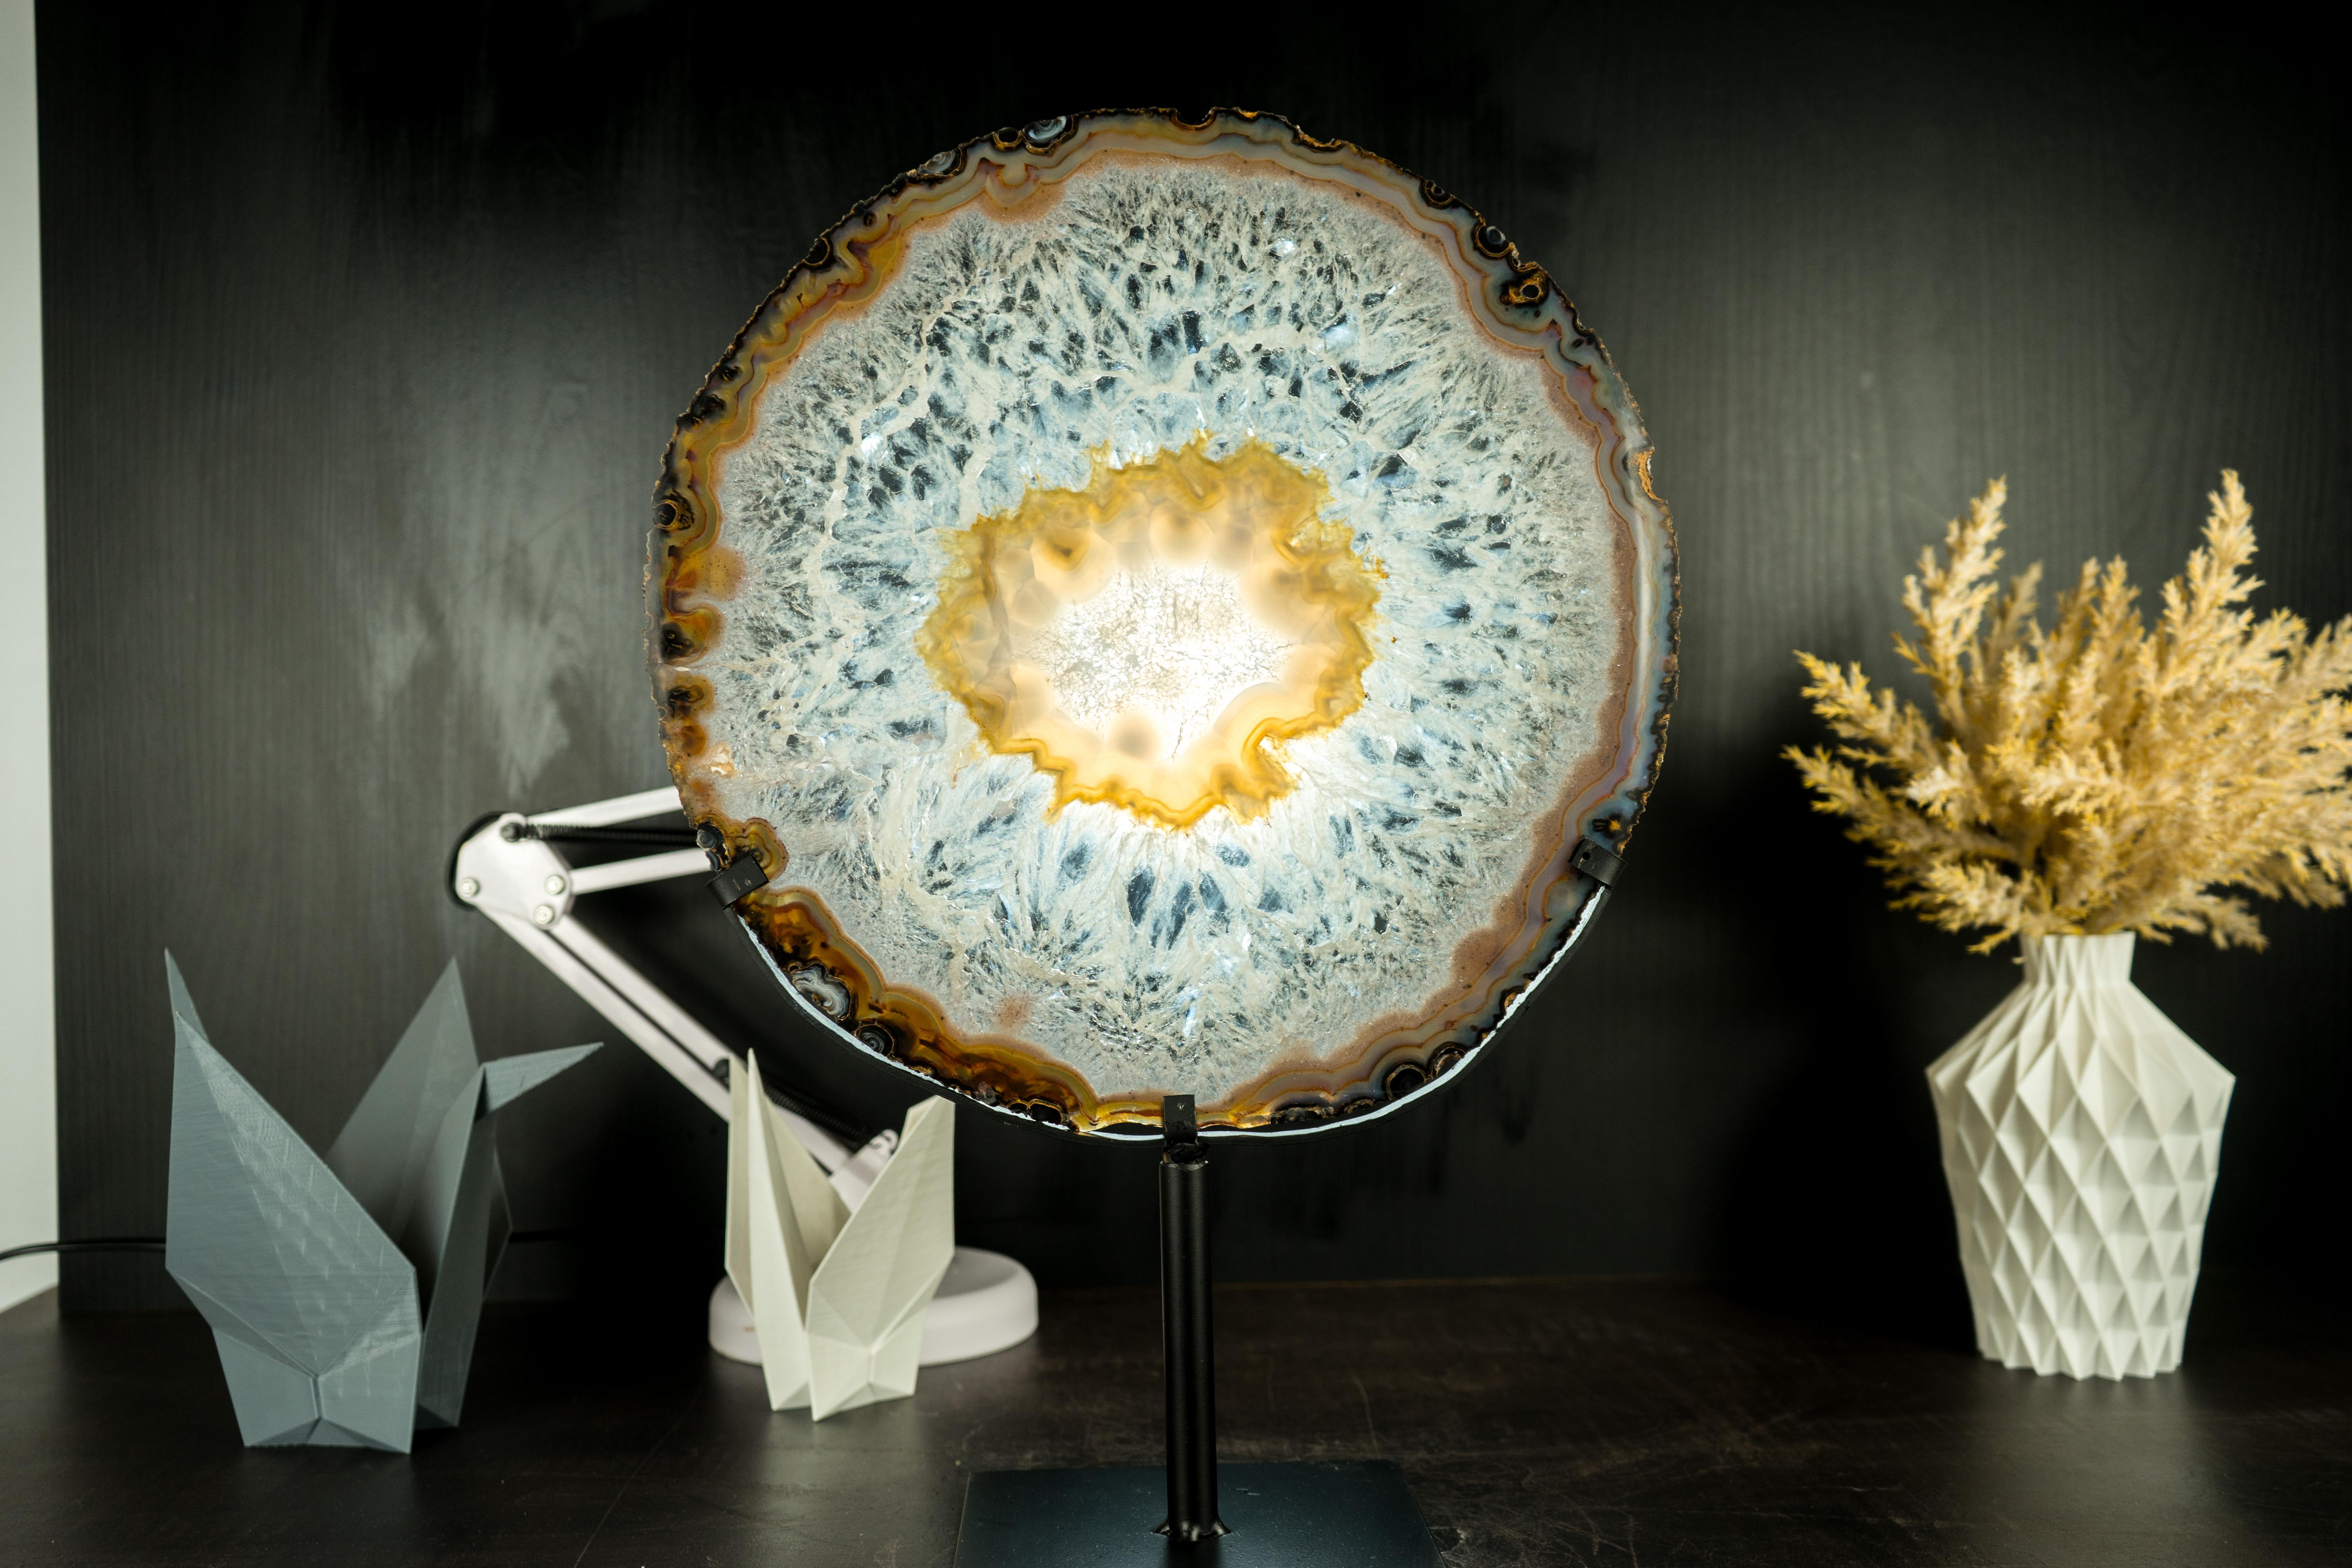 Gallery Grade Large Lace Agate Slice, with Ice-Like Crystal and Colorful Agate 5